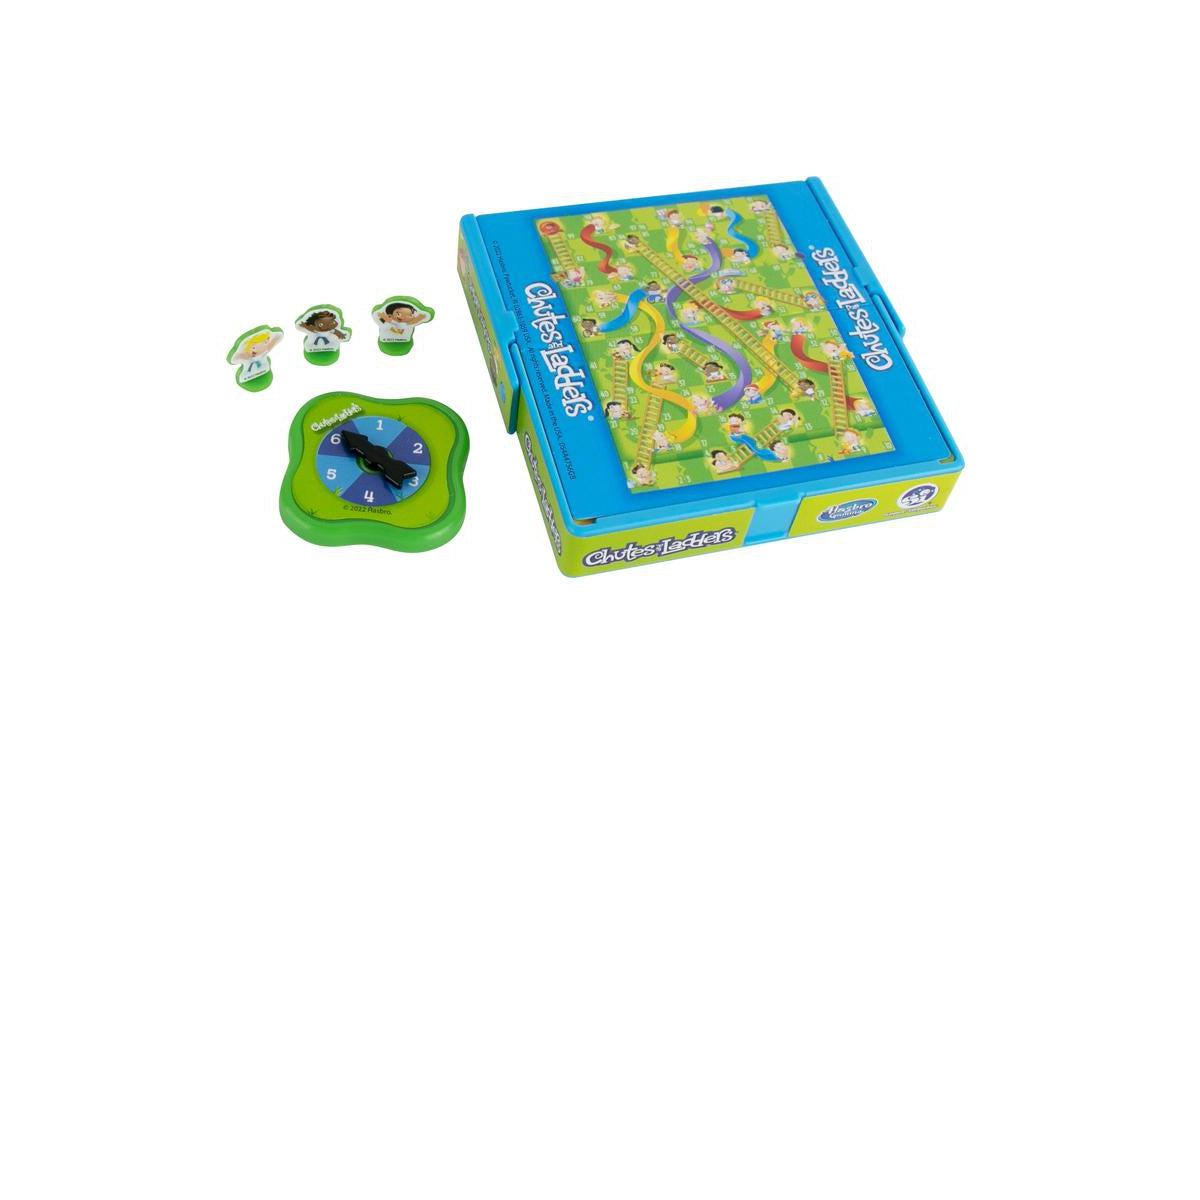 Super Impulse-World’s Smallest Chutes and Ladders-SUP5078-Legacy Toys